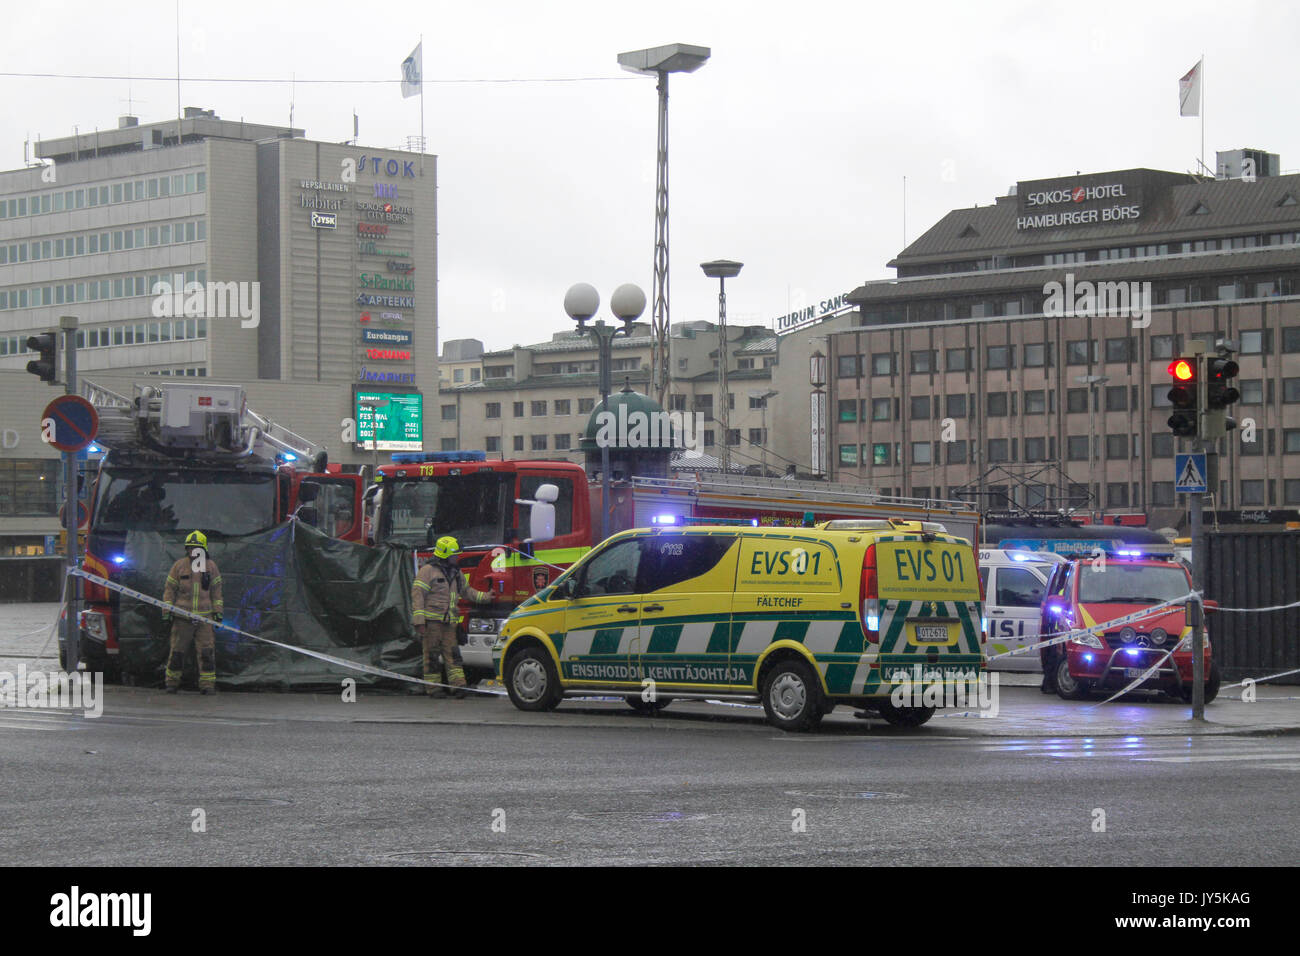 Turku, Finland. 18th August, 2017. Several people have been stabbed in Central Market Square of Turku and Puutori Market Square nearby this location. At least one person has been killed at the Central Market Square and is supposedly behind green tarp. Several other have been wounded. Police has secluded area. Credit: Jukka Palm/Alamy Live News Stock Photo